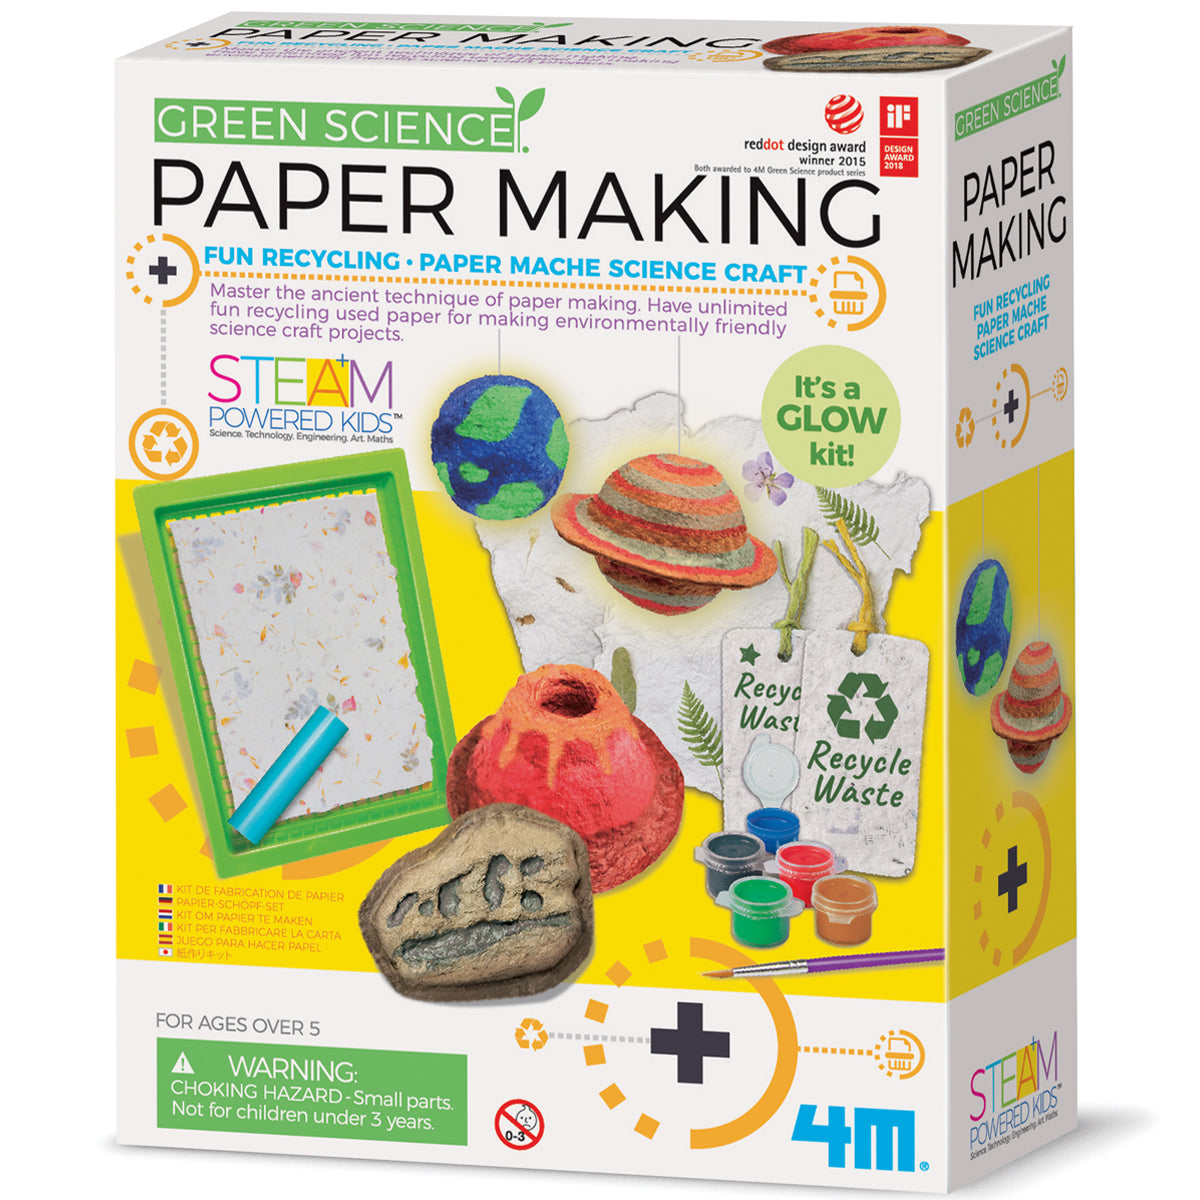 Green Science: Paper Making